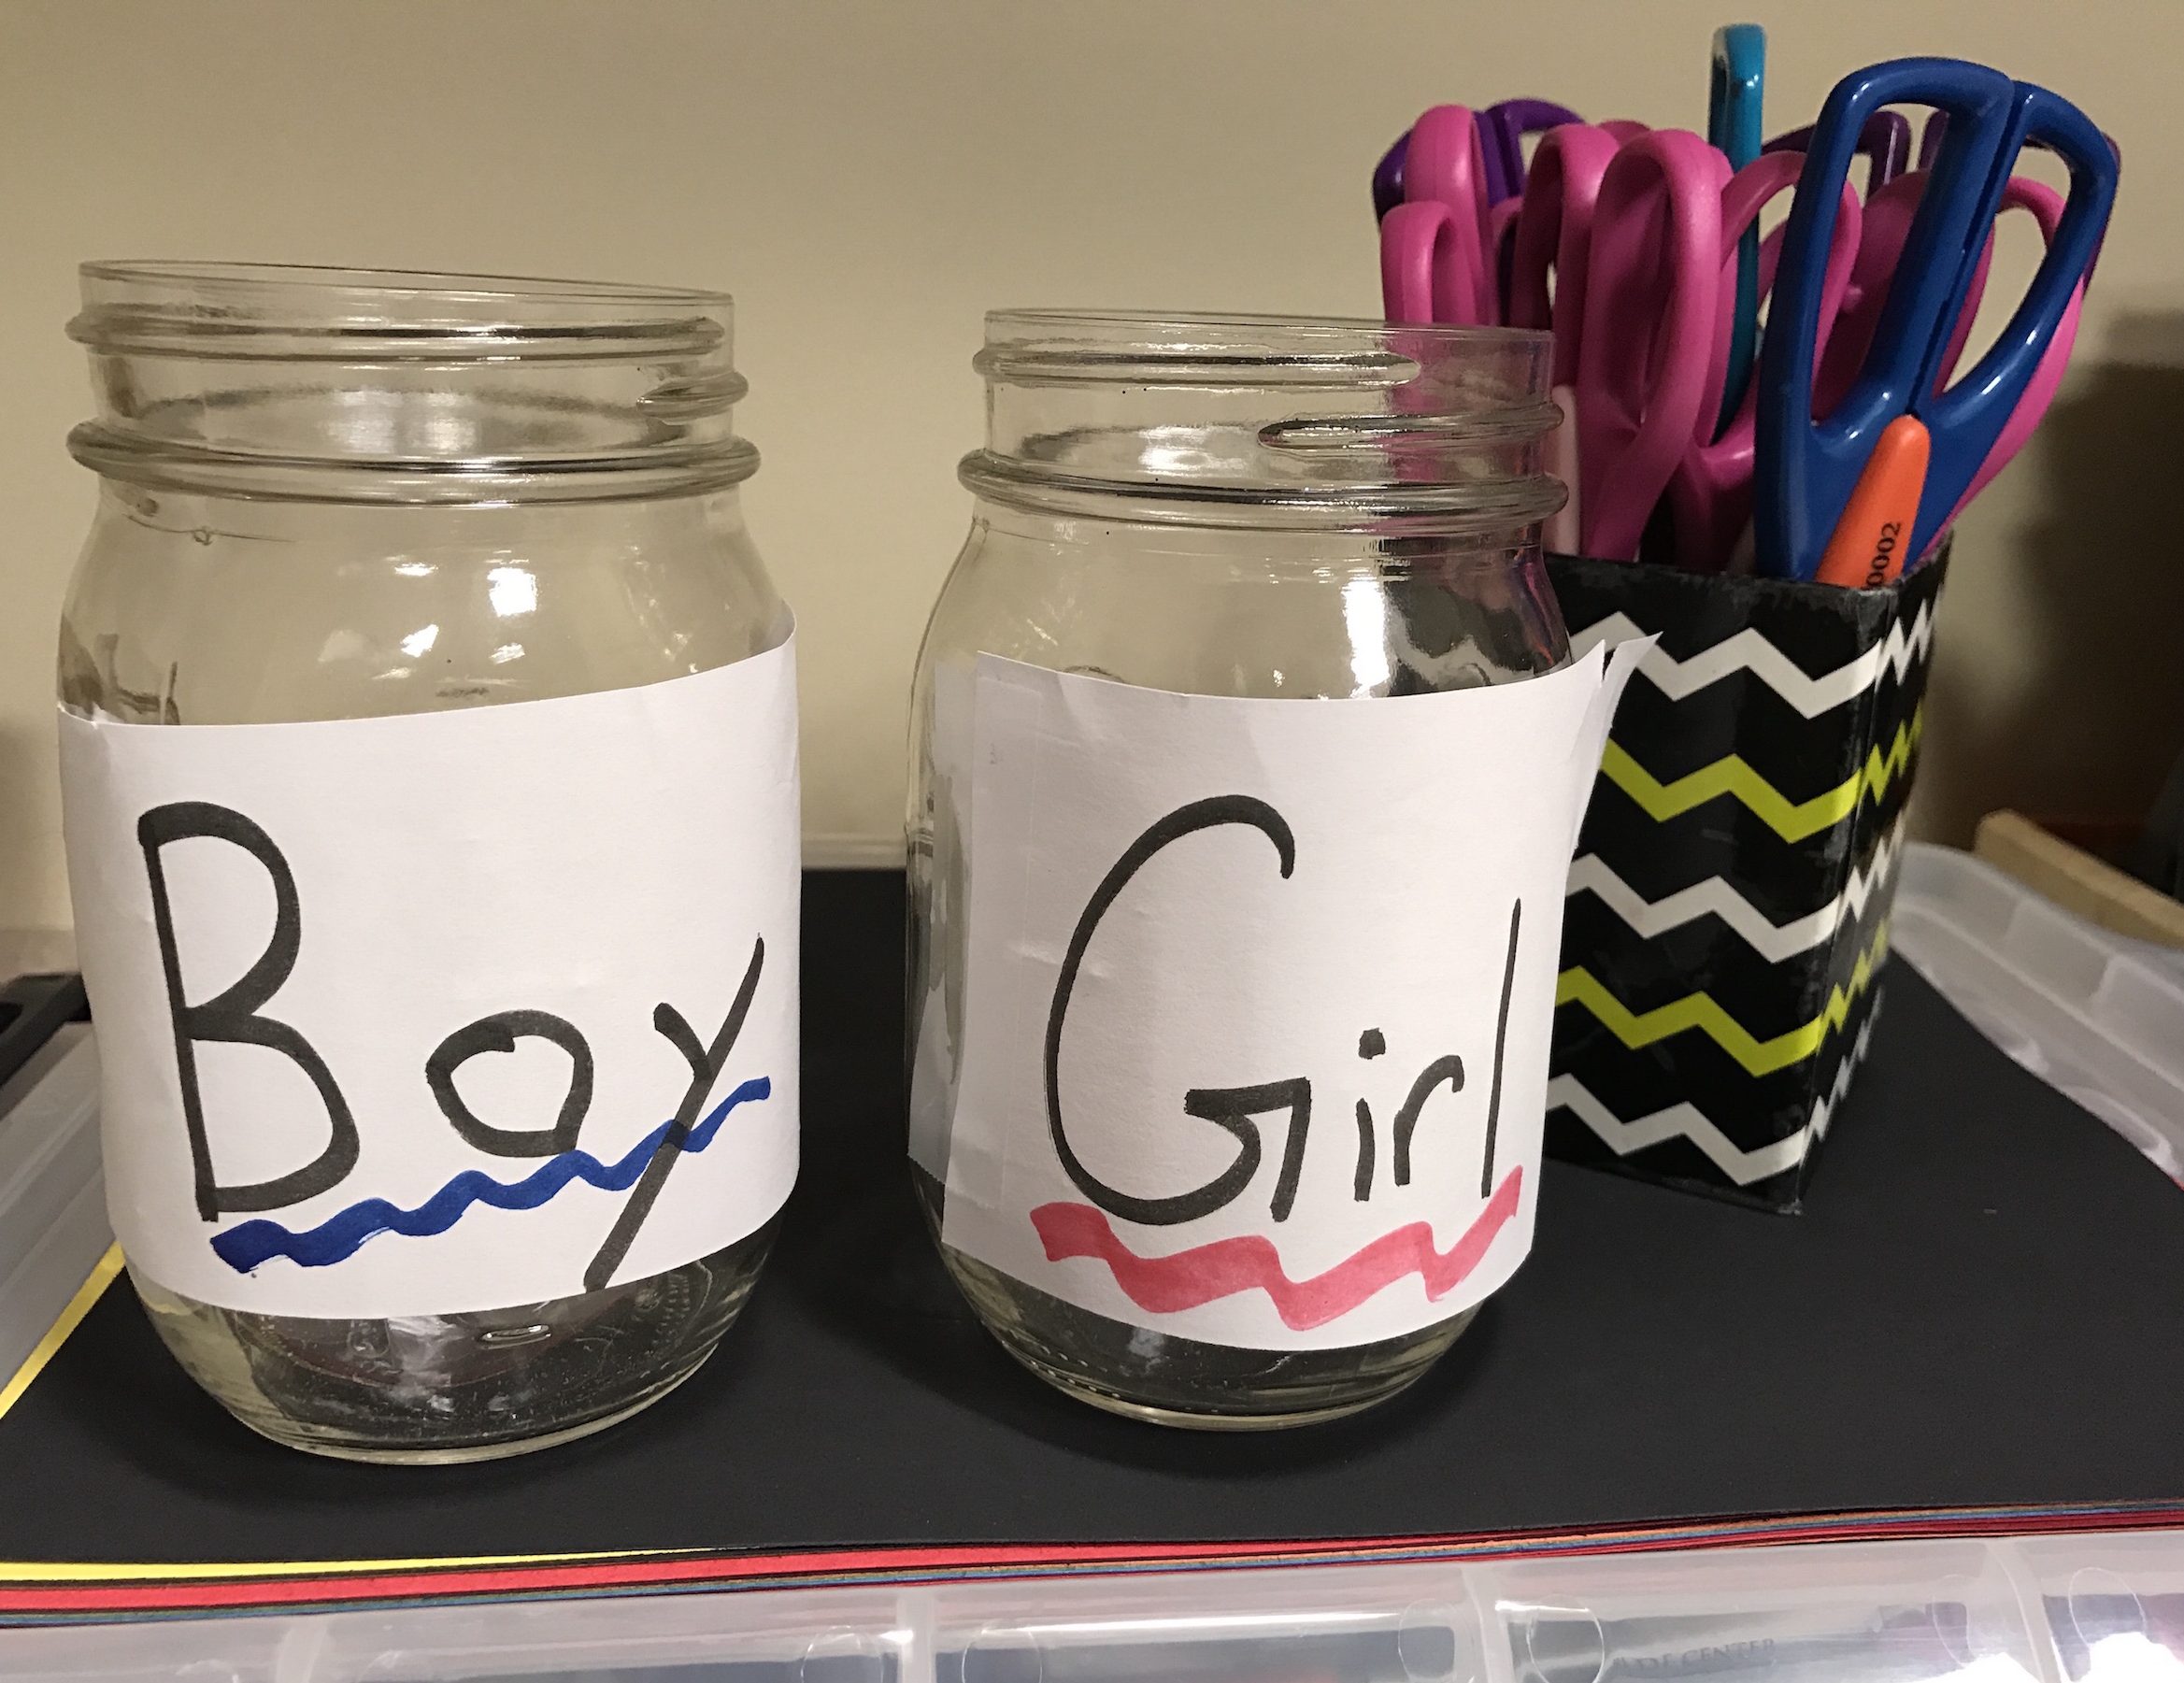 Two jars were marked boy and girl to allow attendees to decide which jar to put images like cars, makeup and superheroes in.
(Photo by Sharlene Phou)